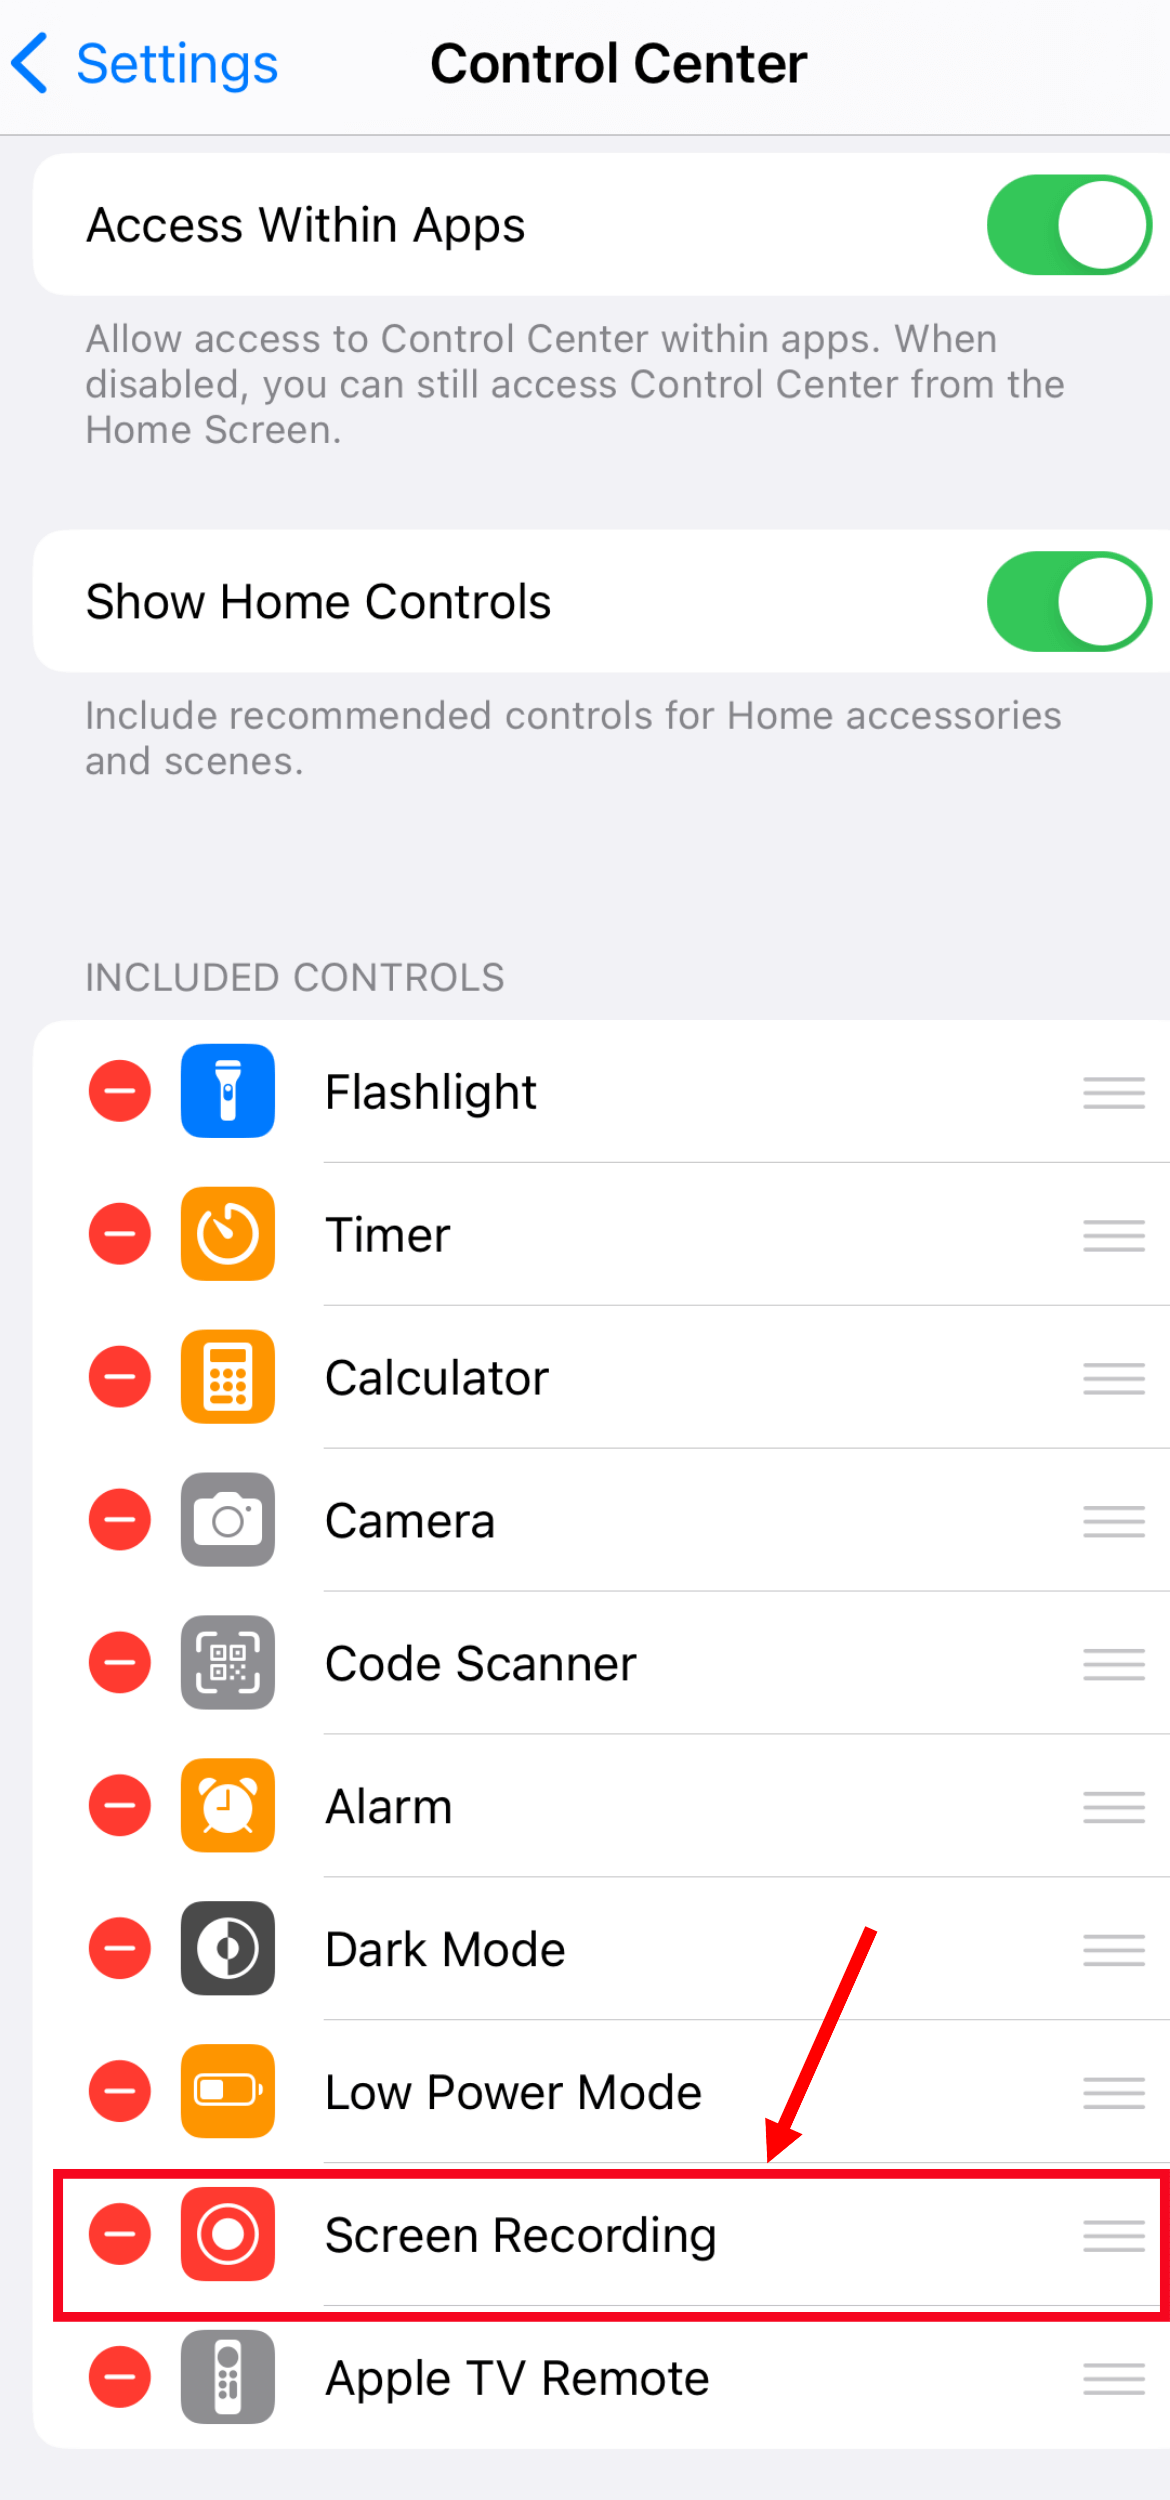 Open the Control Center and enable Screen Recording